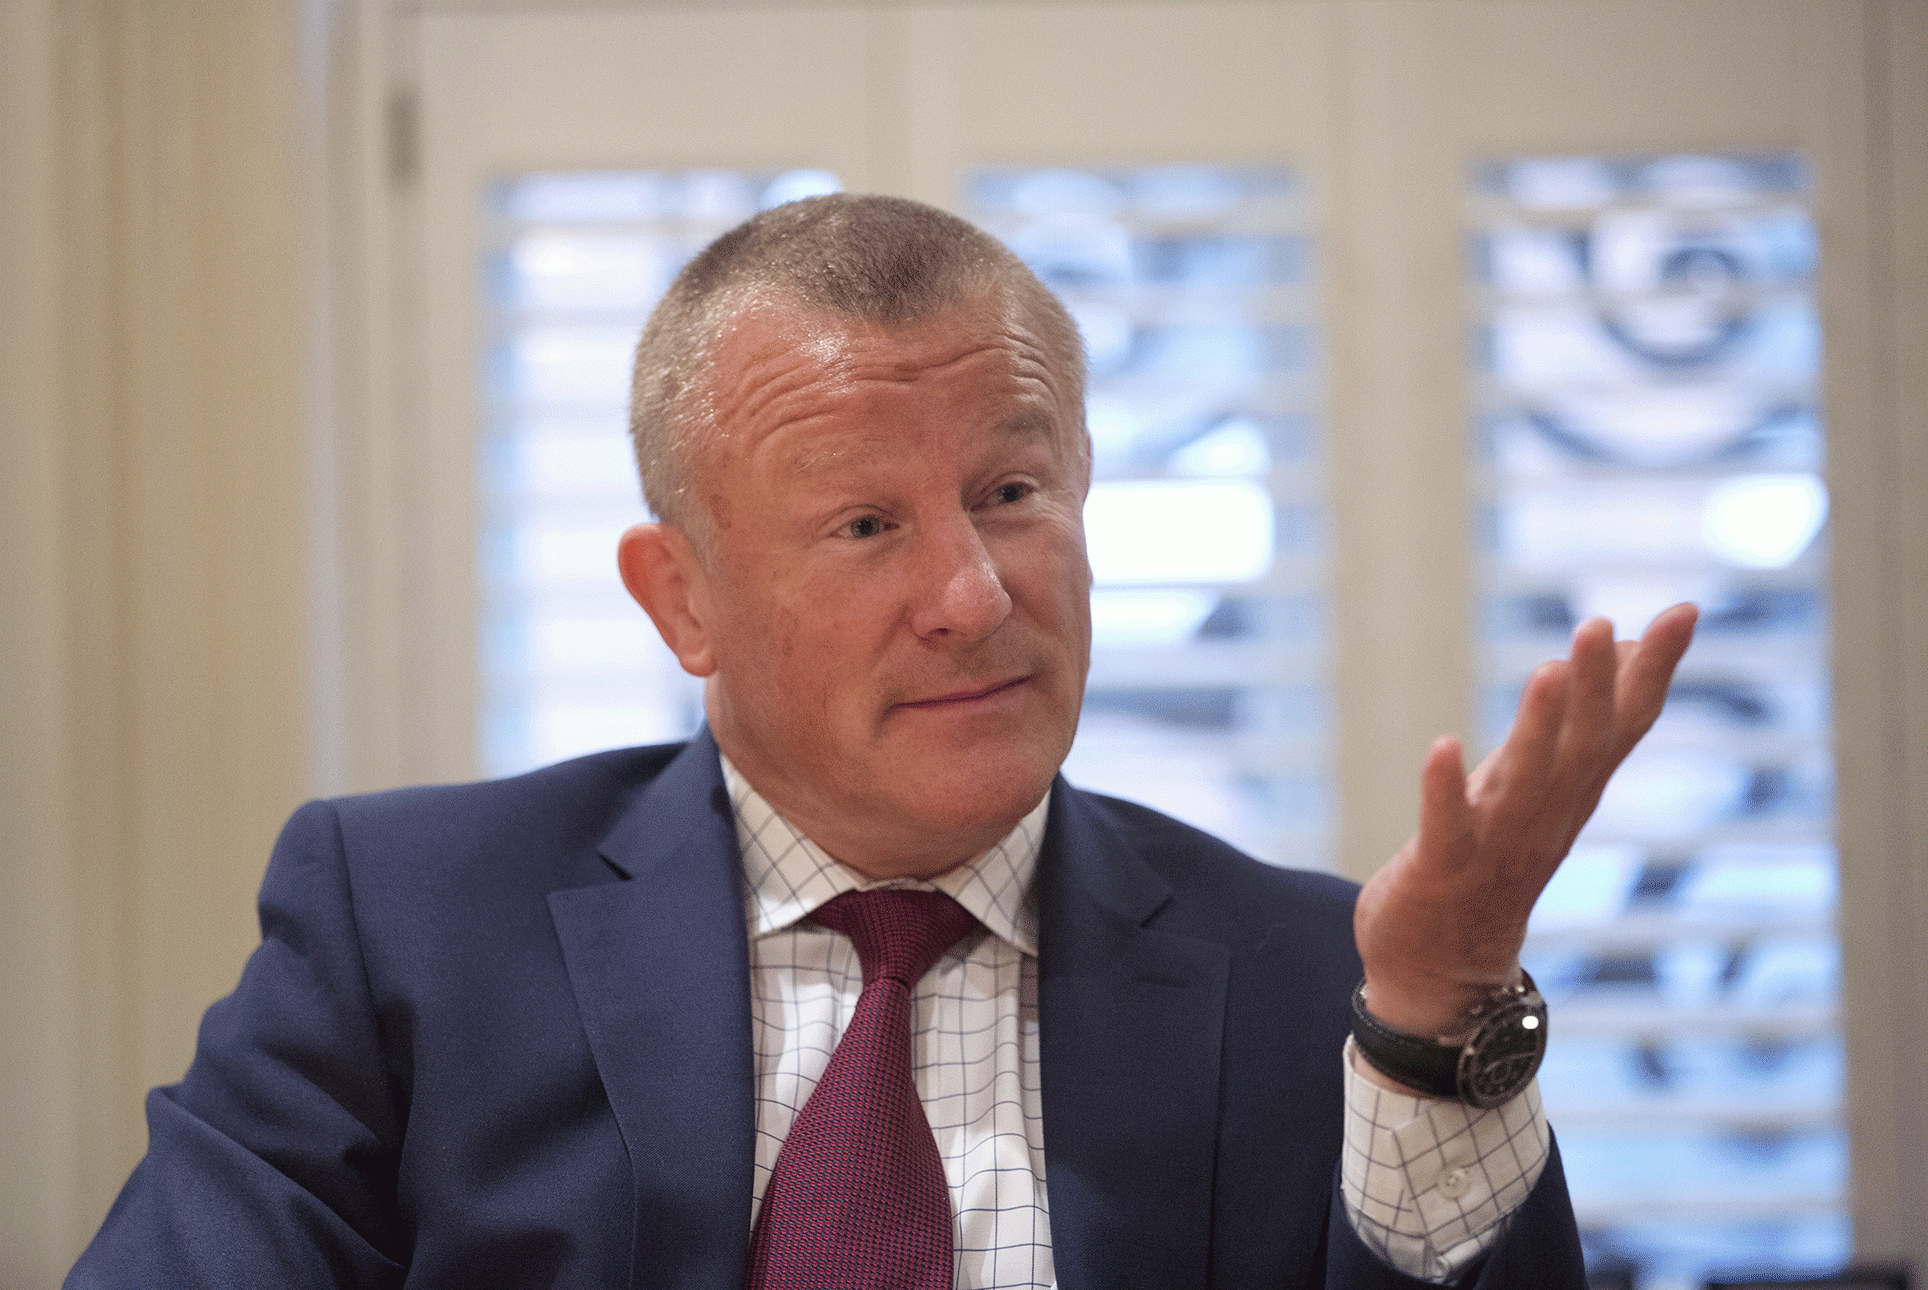 The Run on Neil Woodford and the Position of the ‘Retail’ Investor